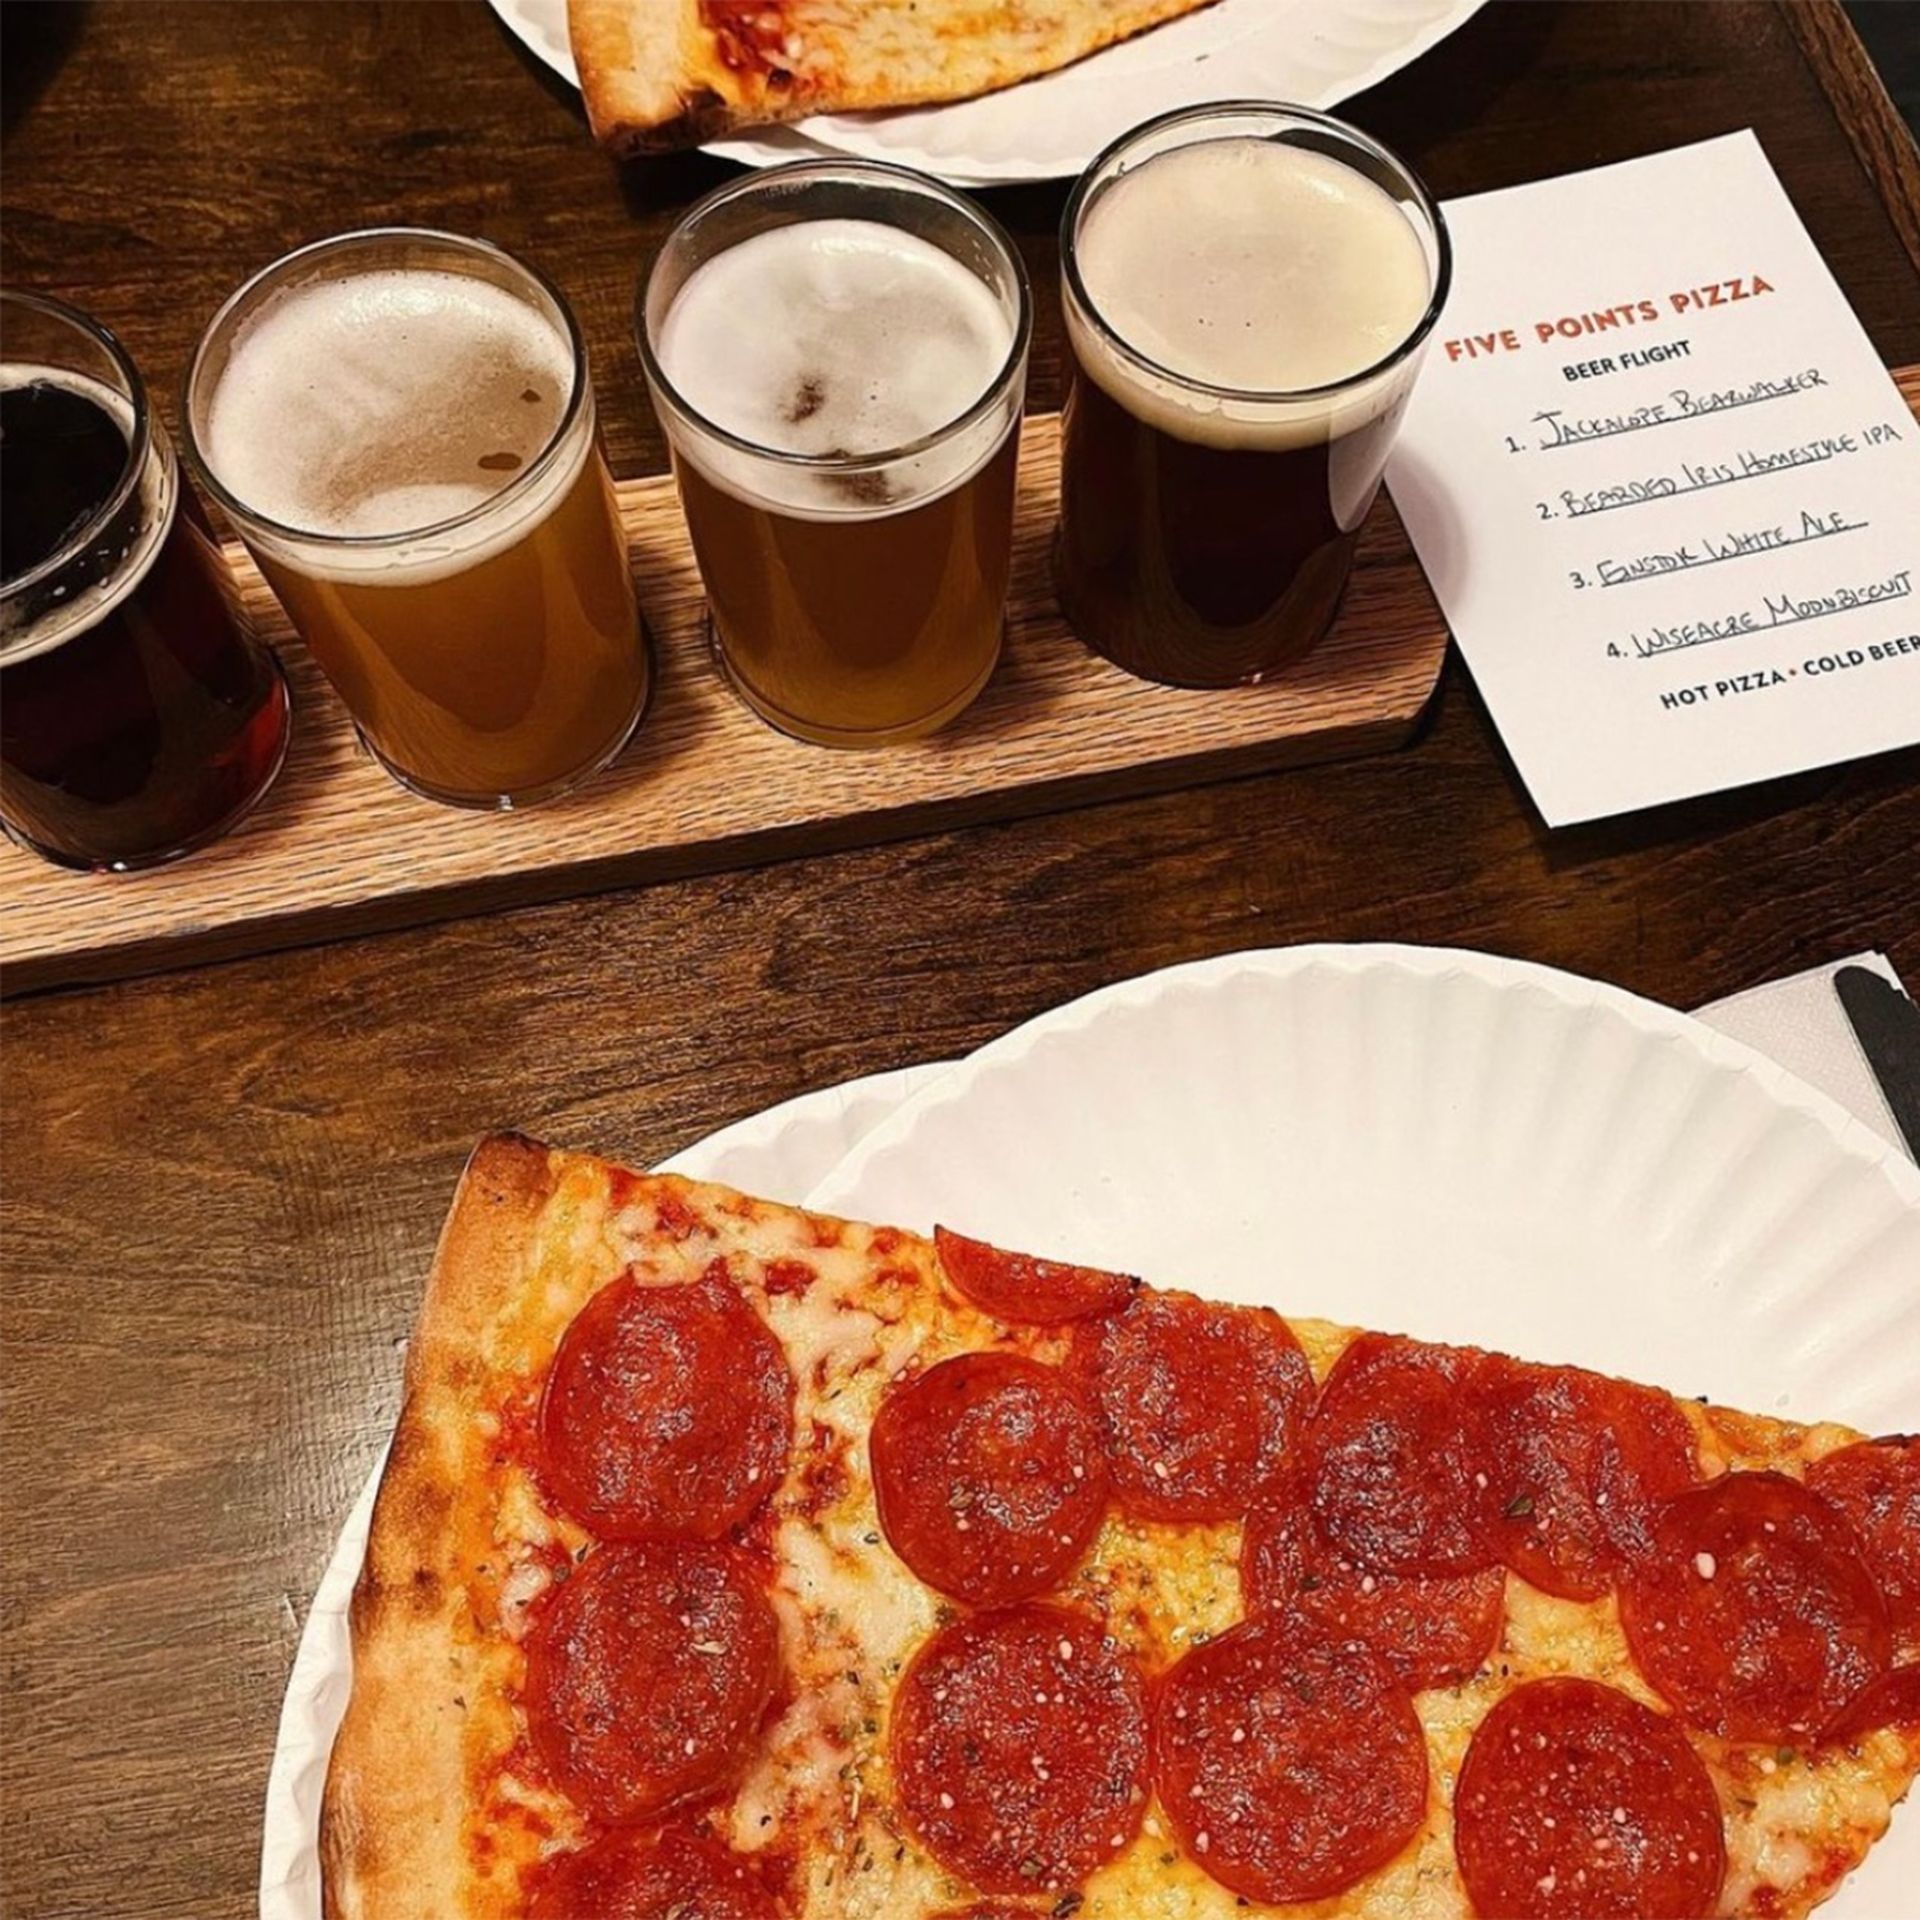 Draft beer flight and pizza